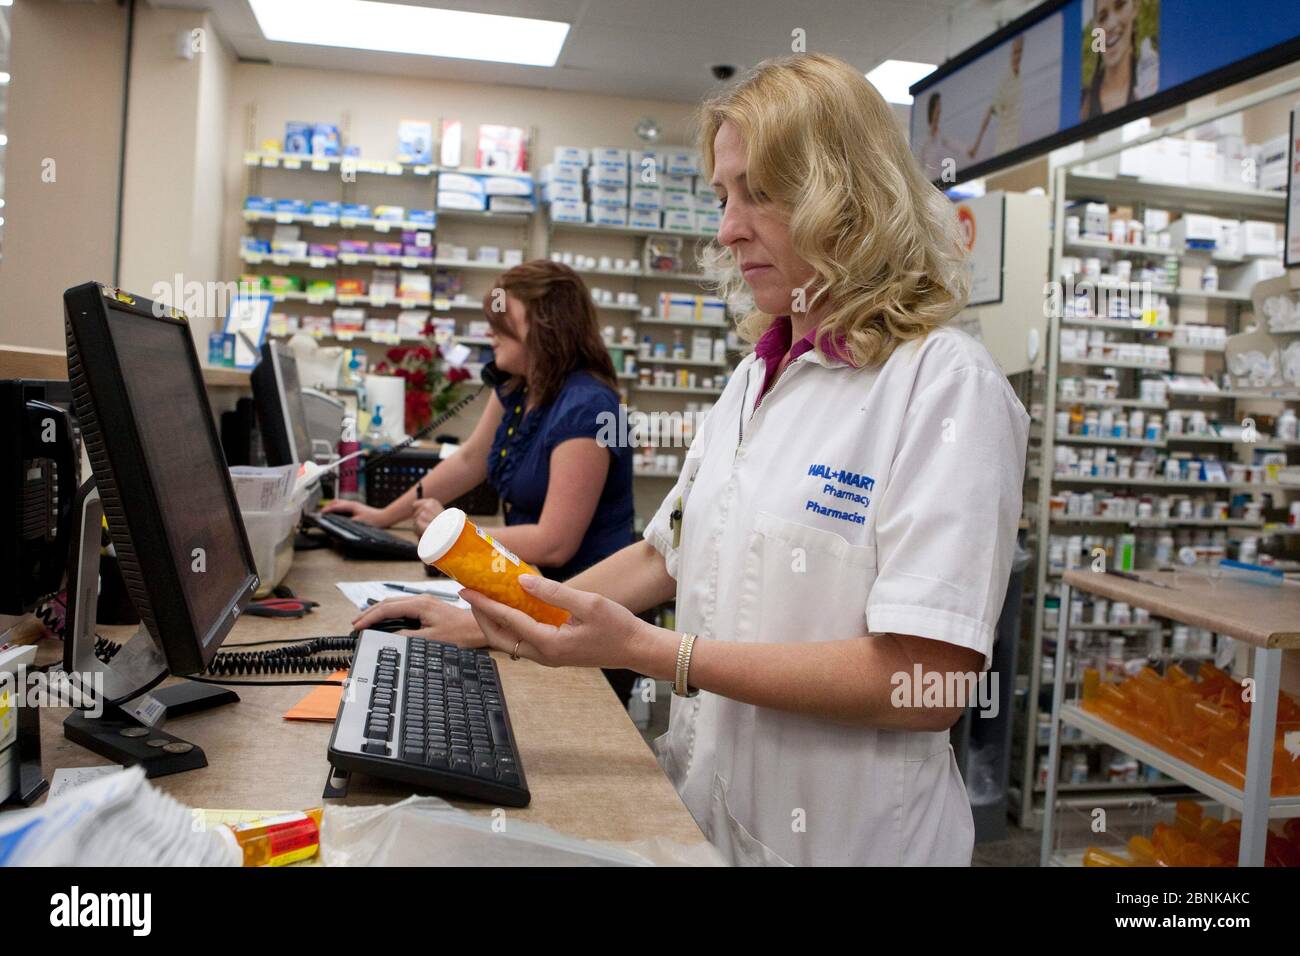 San Marcos, Texas USA, 2012: Female white Pharmacist and pharmacy tech working at Wal-Mart Supercenter pharmacy. ©Marjorie Kamys Cotera/Daemmrich Photography Stock Photo